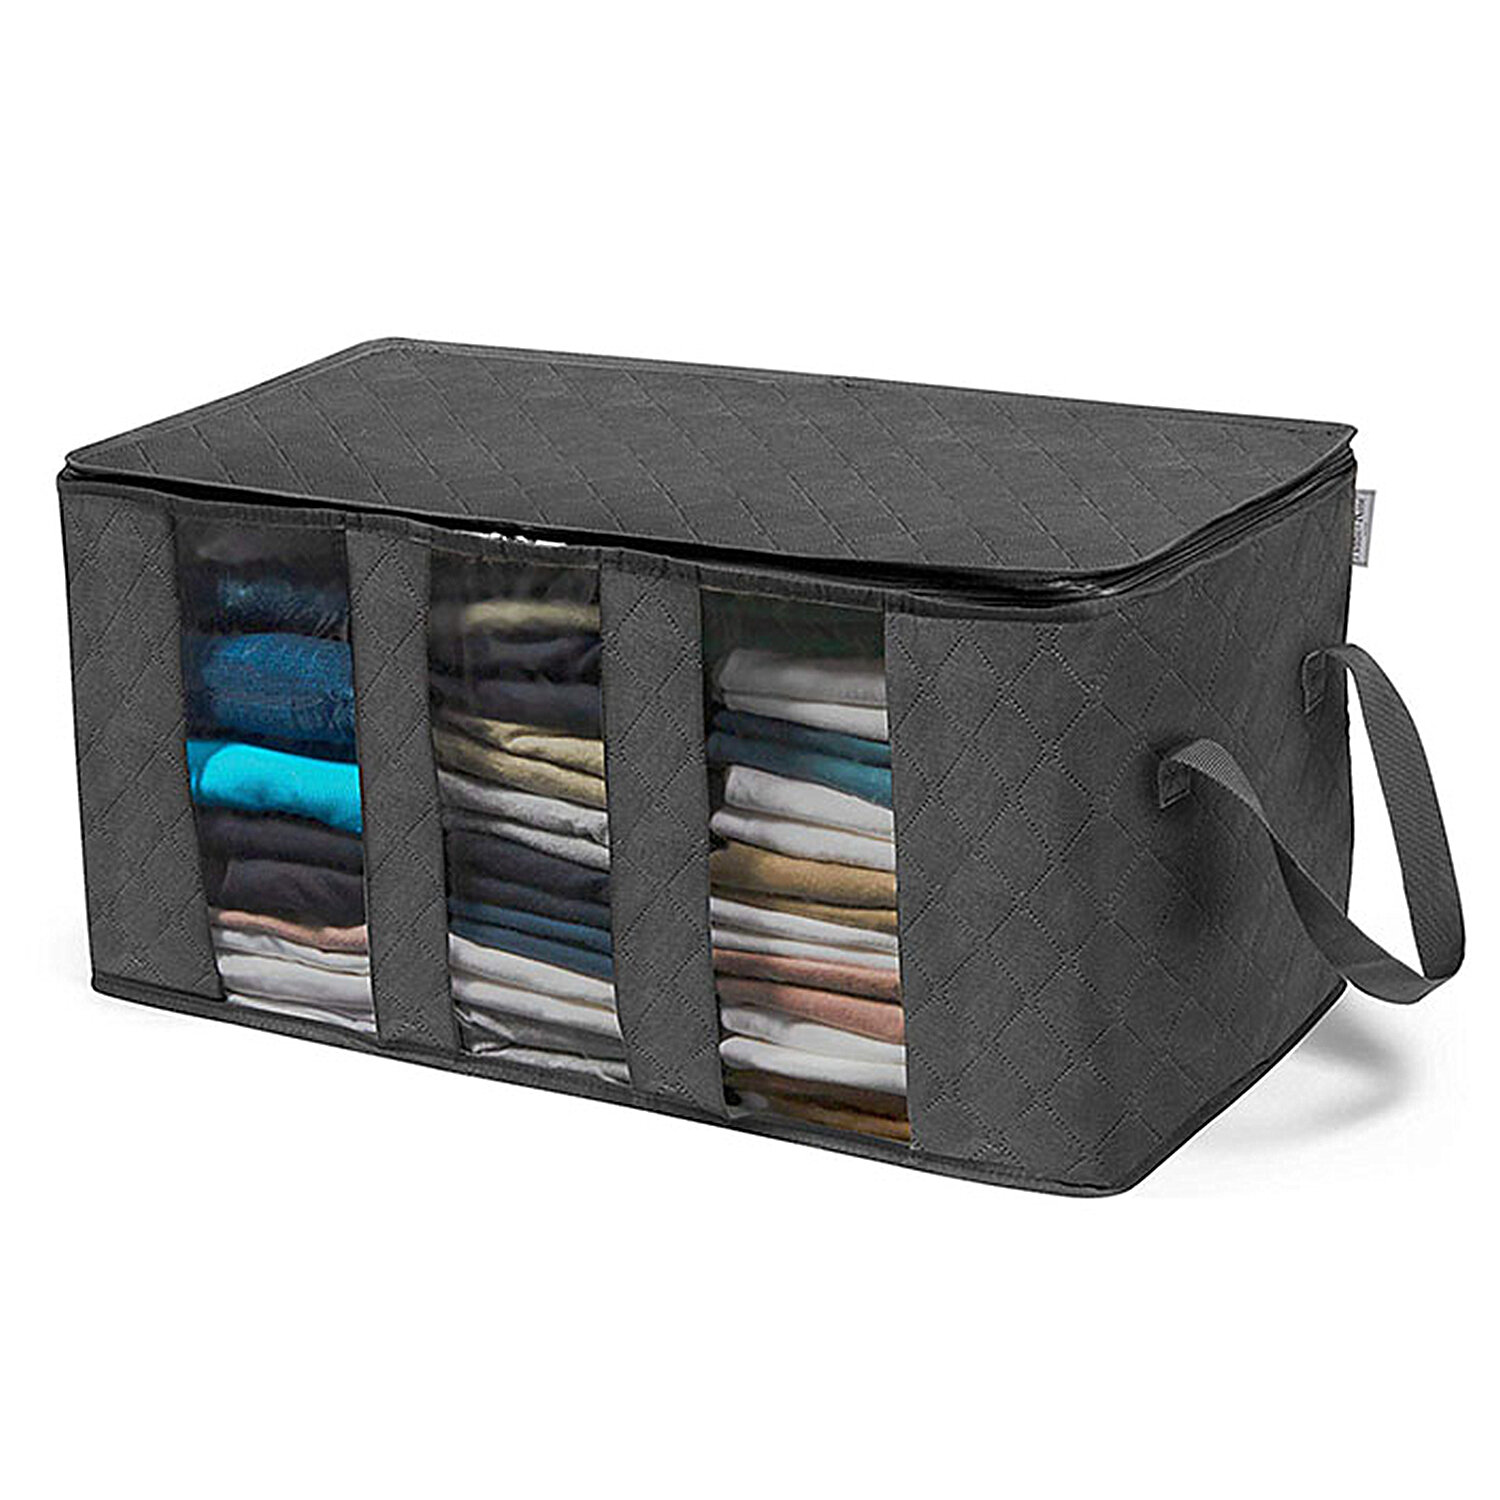 Practical Storage Hanger Bag Two Handle Nonwoven Fabric Organizer For Home  Eco Friendly, Space Saving Solution 0221 From Earlybirdno1, $4.81